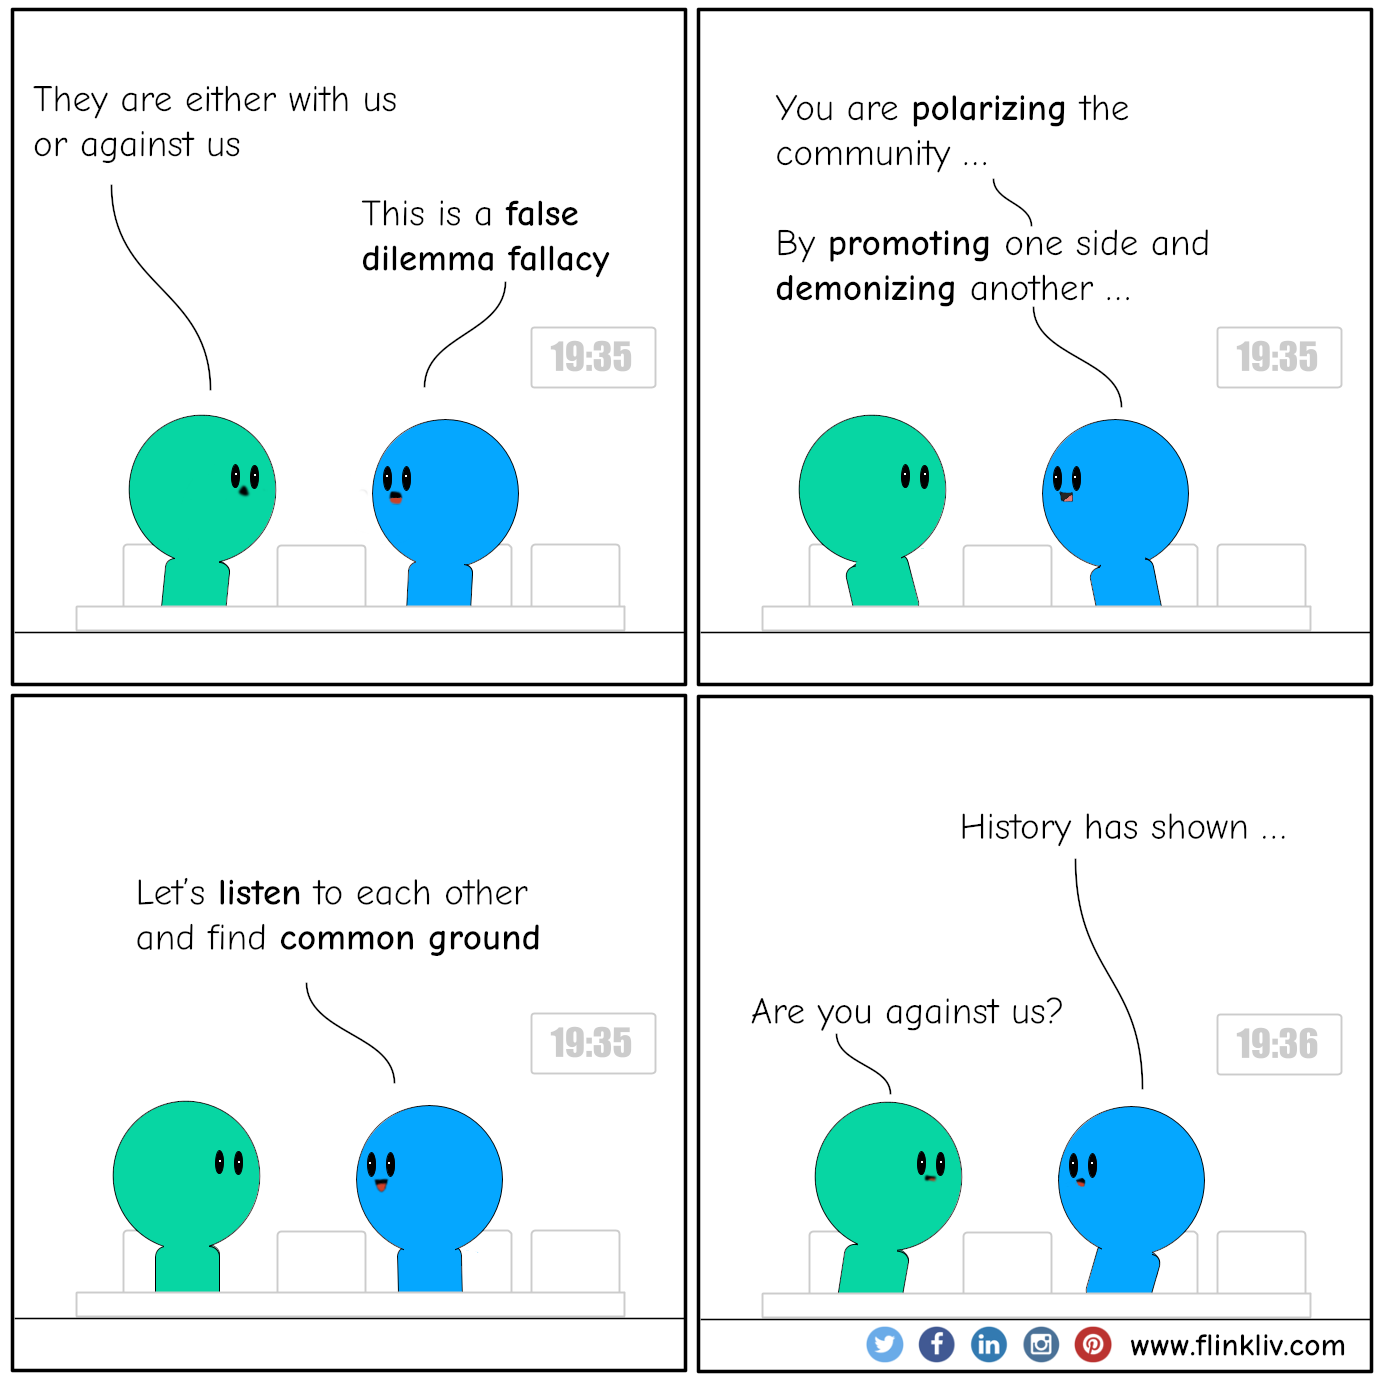 Conversation between A and B about false dilemma fallacy. 
              A: They are either with us or against us
              B:This is a false dilemma fallacy
              
              B: You are polarizing the community by promoting one side and demonizing another.
              
              B: Let's listen to each other and find common ground.
              
              B:History has shown … 
              A:Are you against us?
              
              